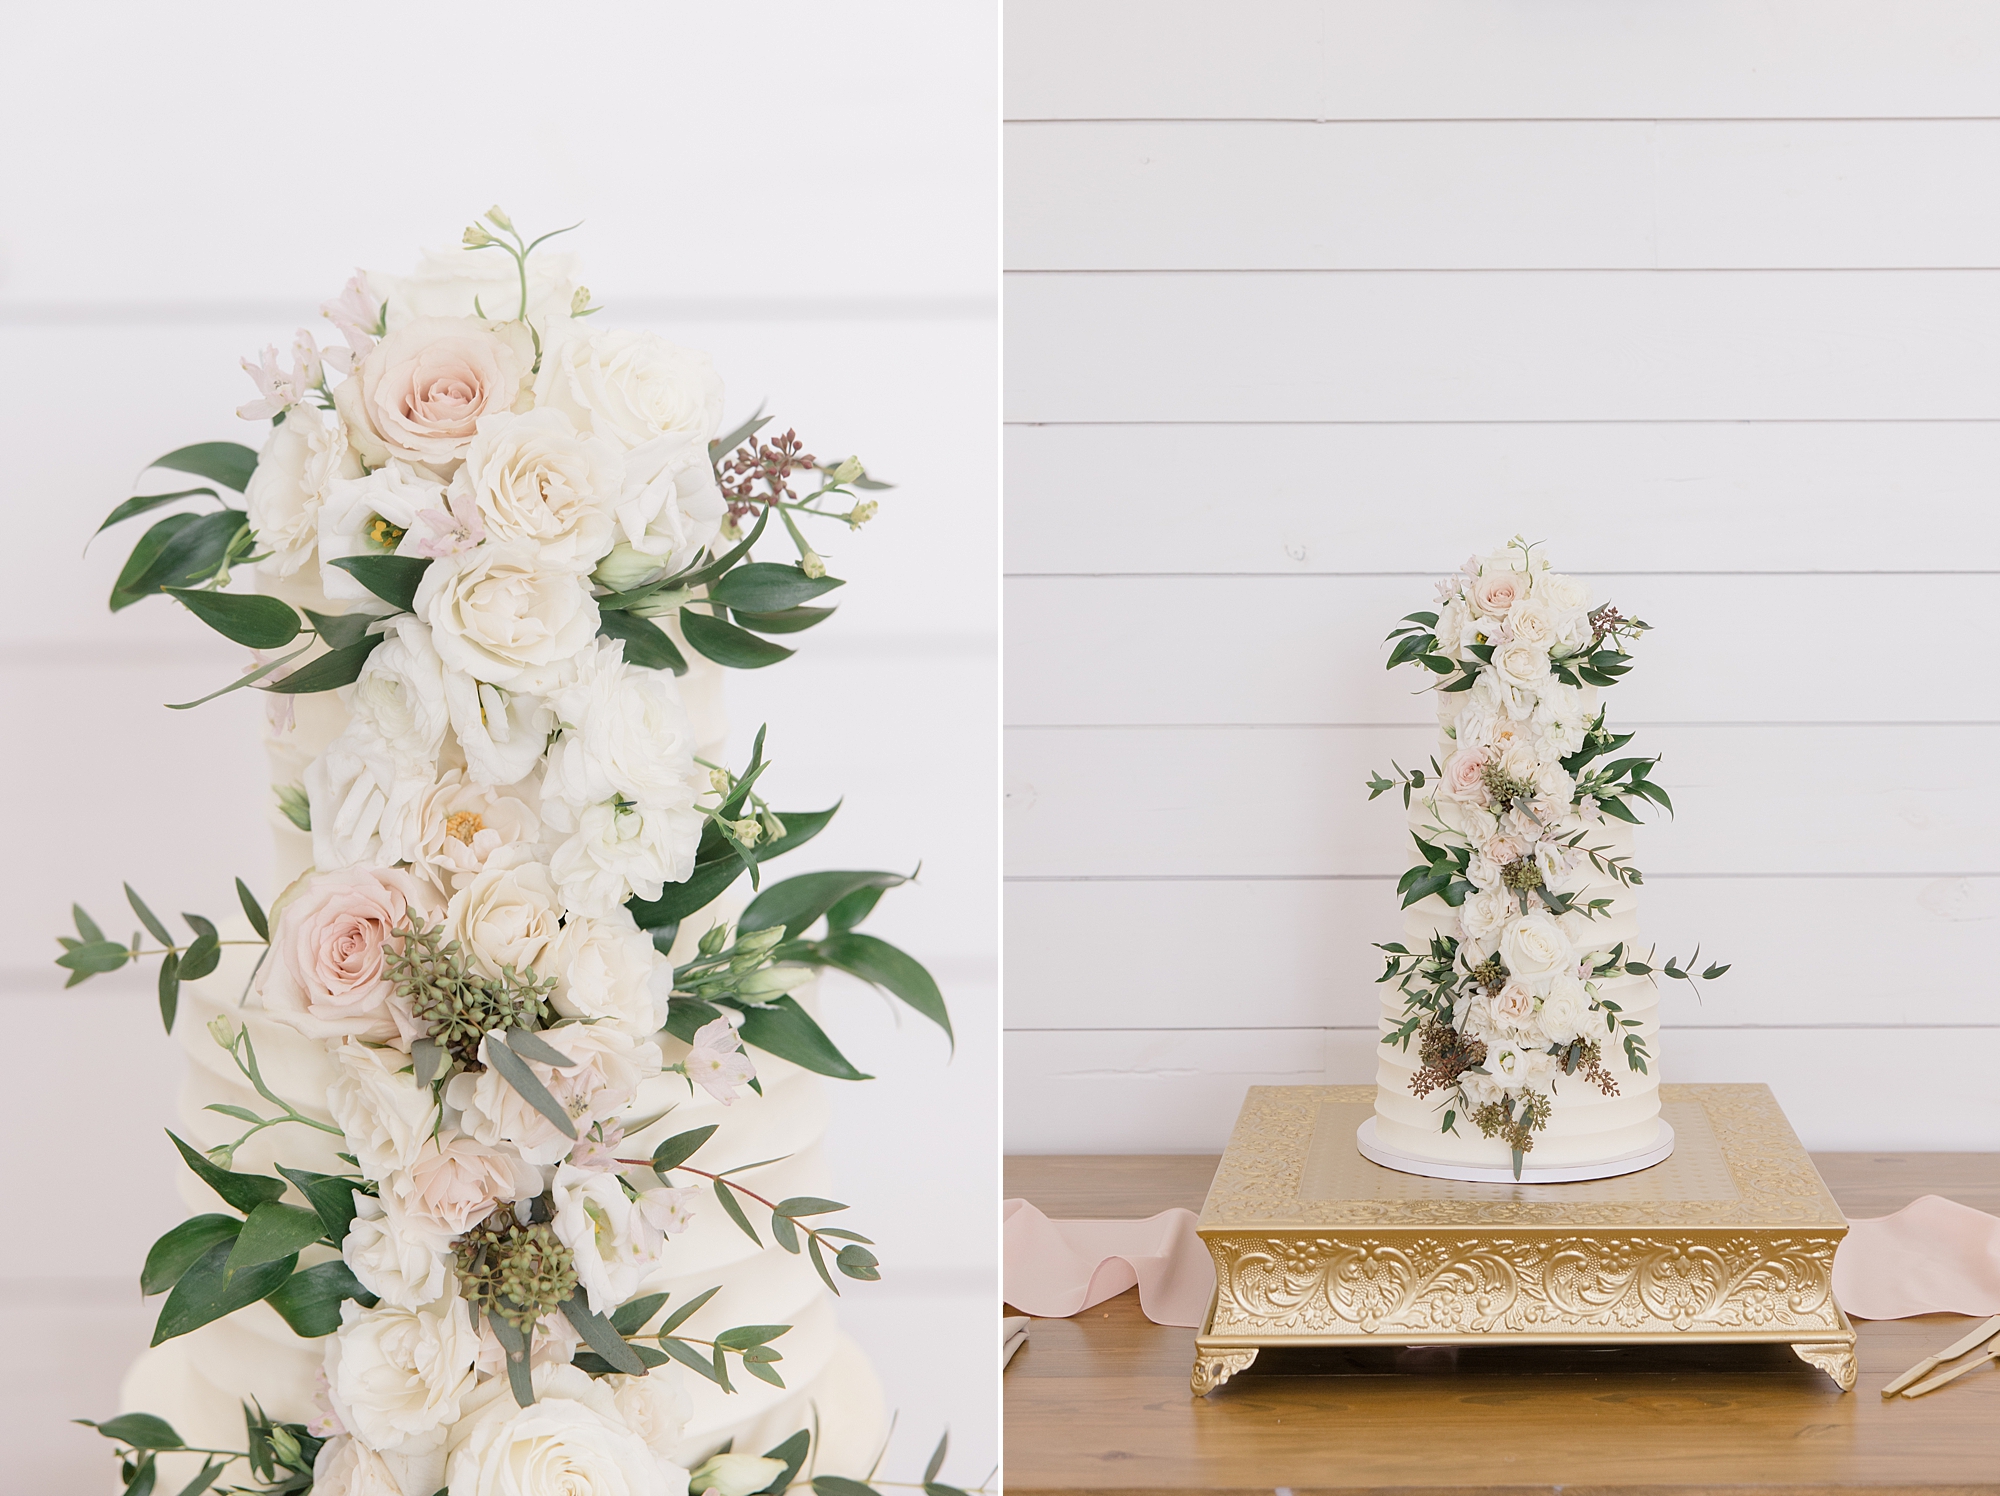 wedding cake with pink and ivory flowers by shiplap wall at The Gardenia